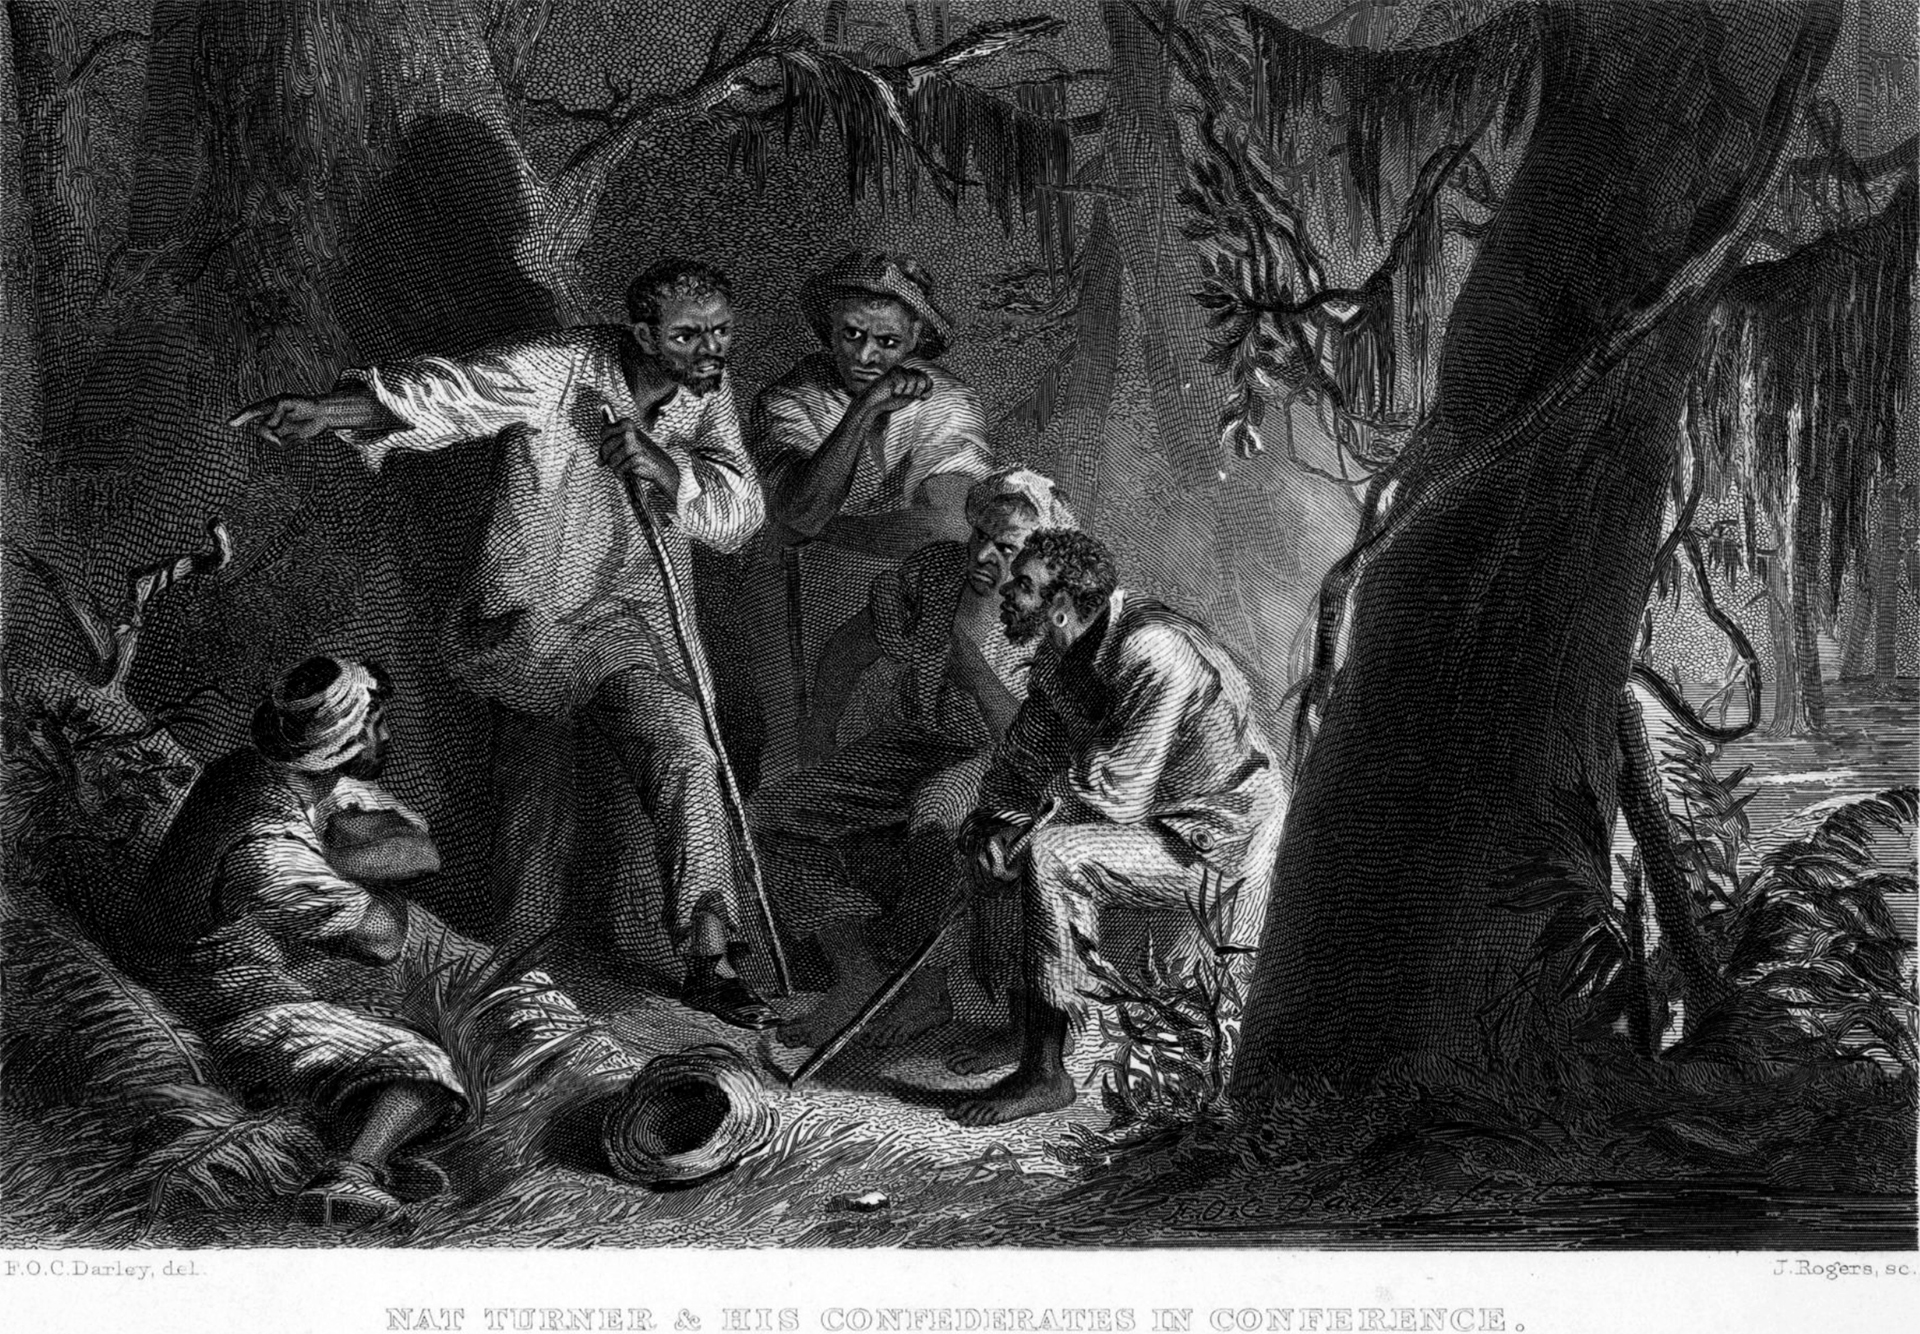 A black and white illustration of a group of men in a forest, having a discussion. Nat Turner is standing and holding a stick, while the others are sitting on the ground or on tree stumps.